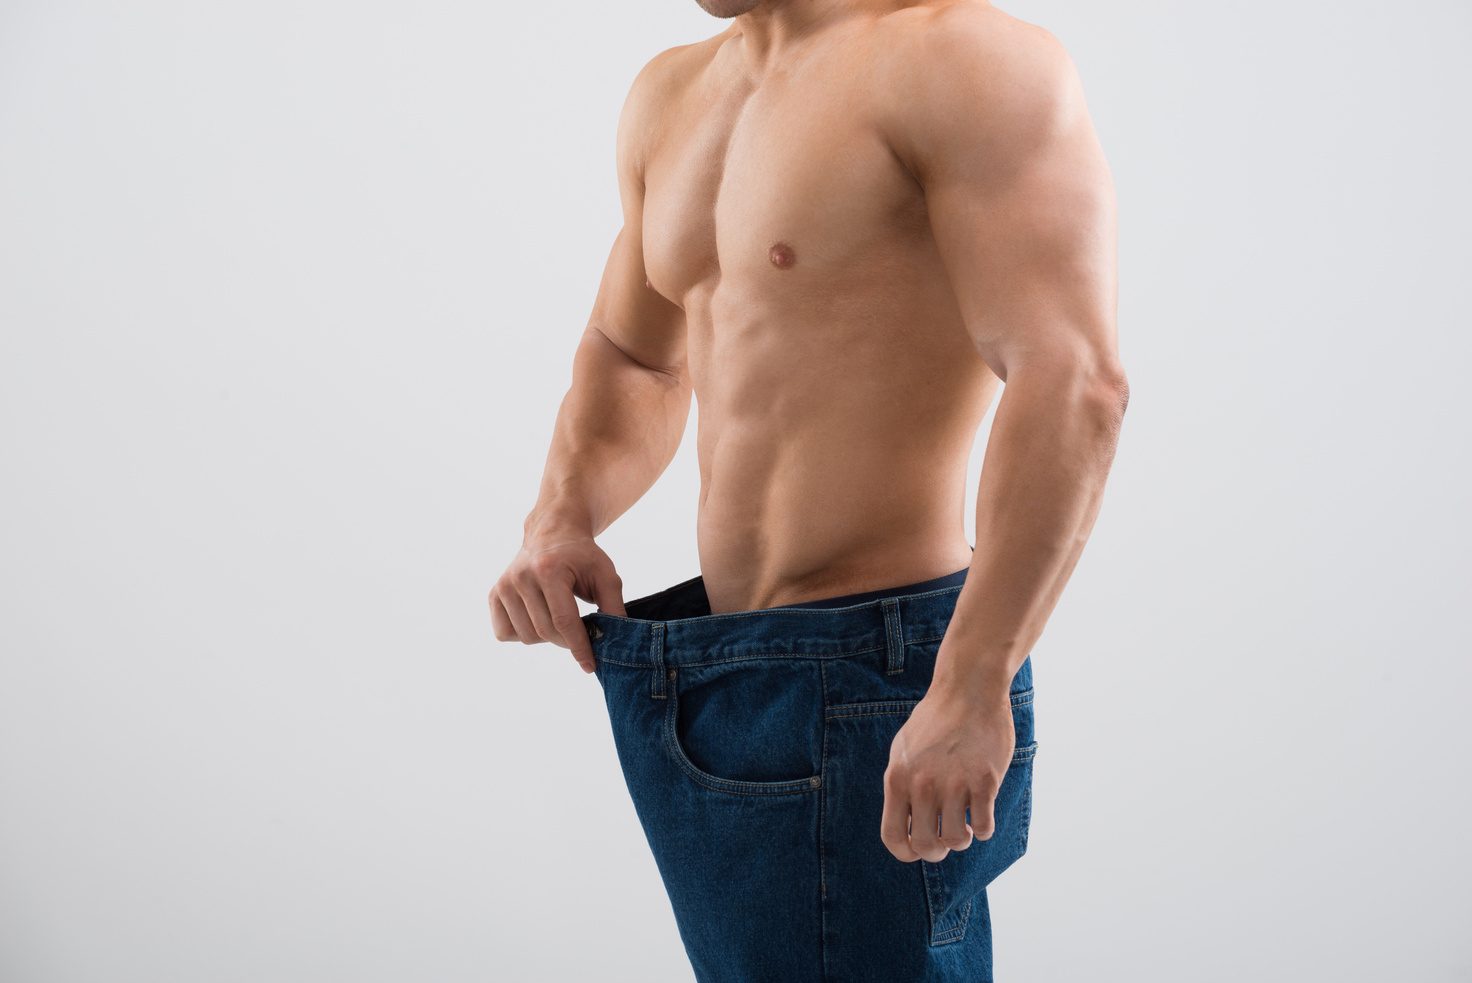 Muscular Man In Old Jeans Showing Weight Loss